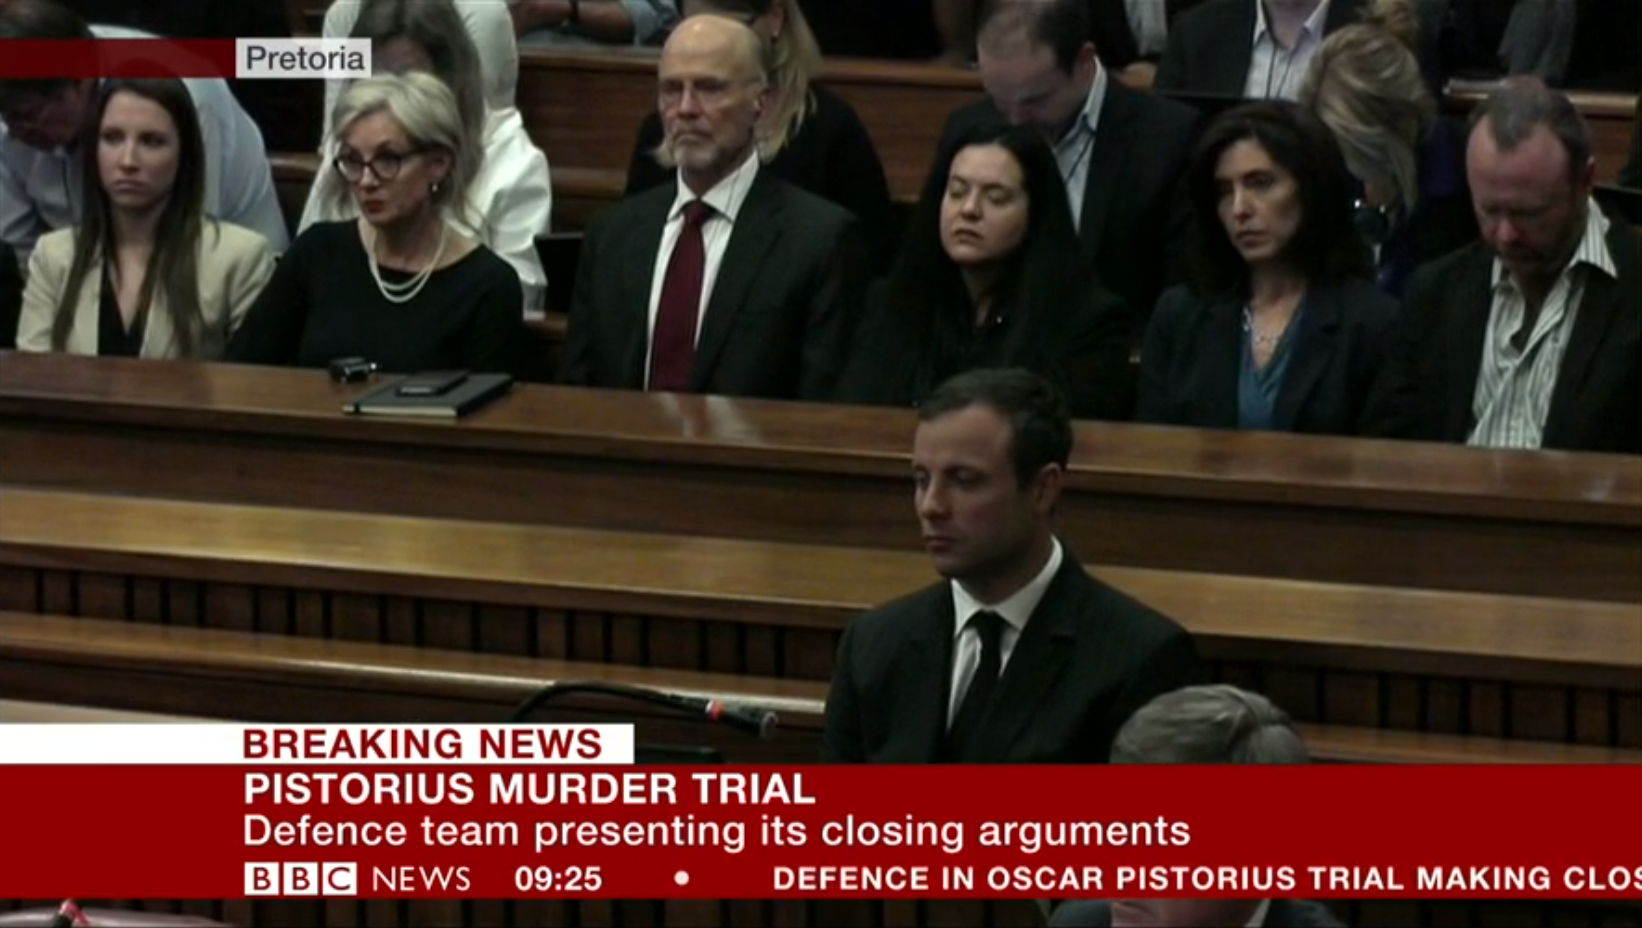 The World is on Fire and the BBC is Broadcasting Rolling Coverage of the Most Boring Murder Trial in History